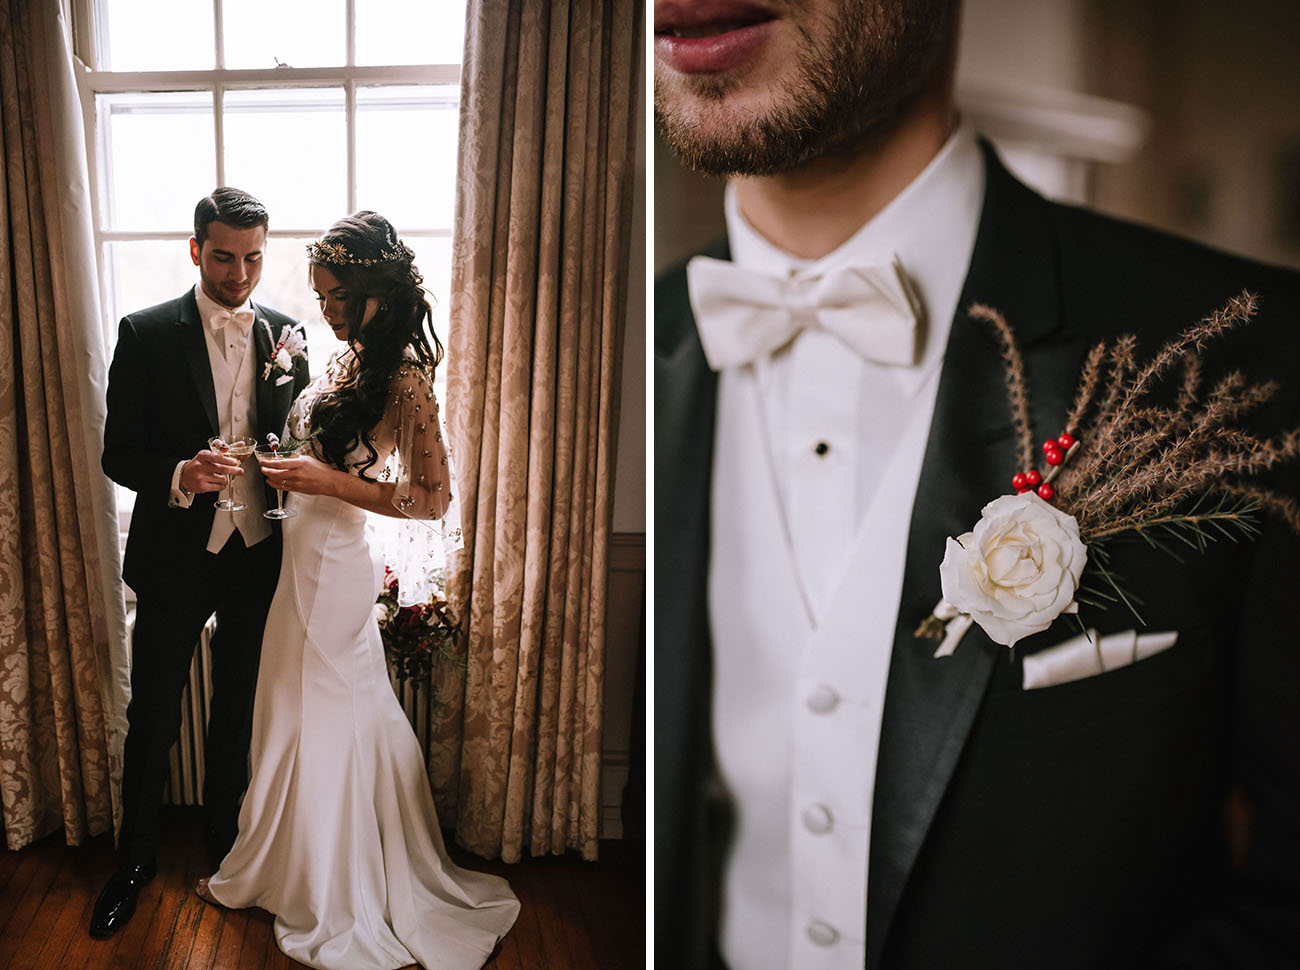 The groom was wearing a tux with a white shirt and bow tie plus a textural boutonniere